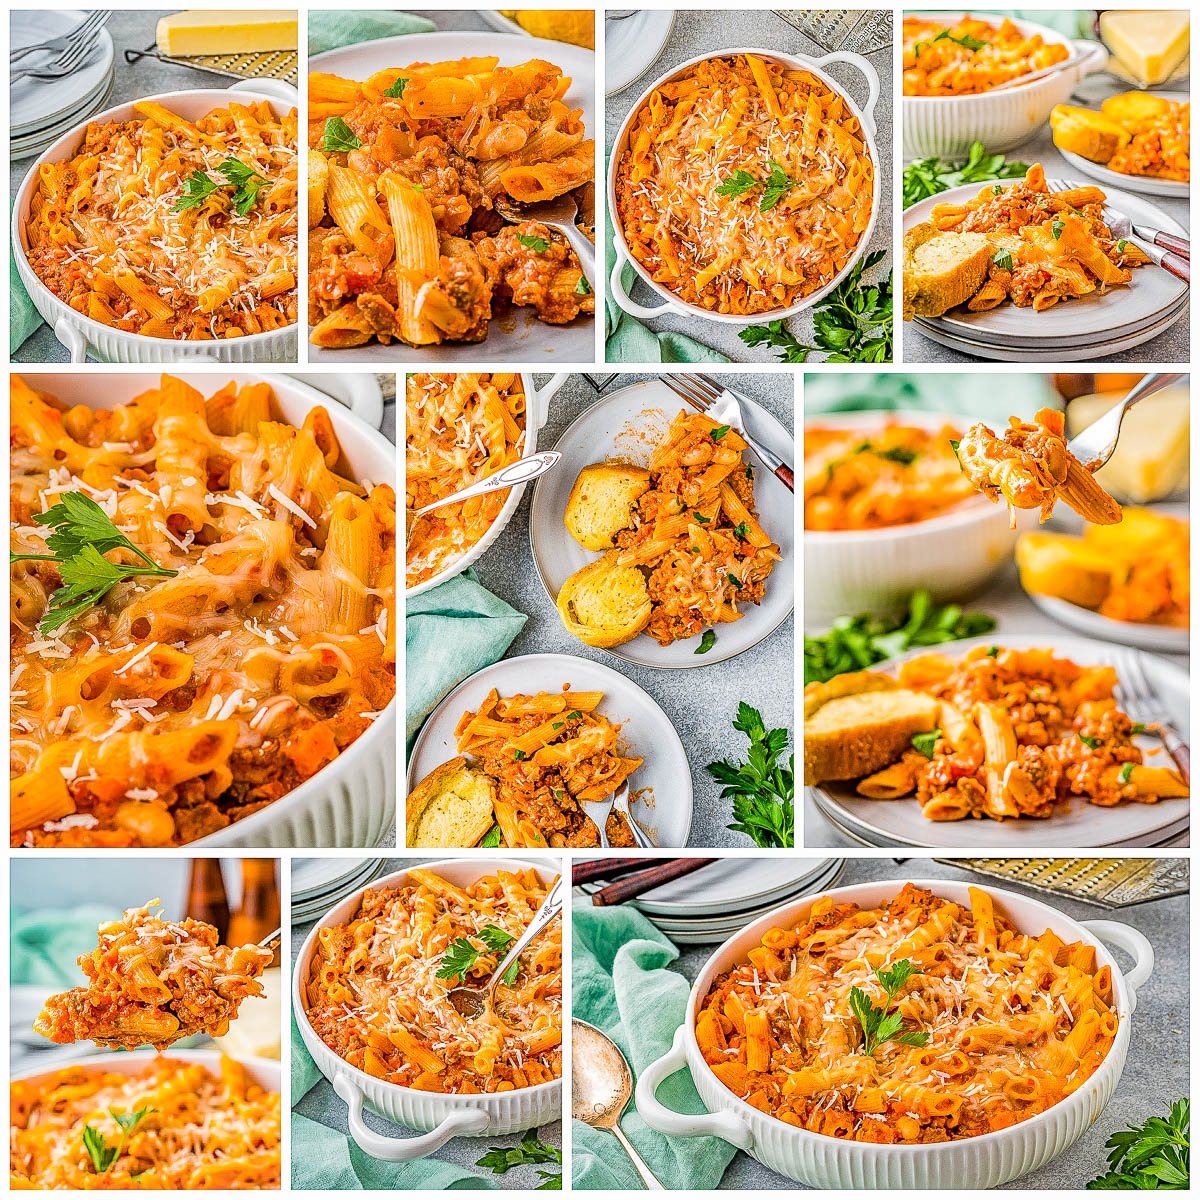 Pasta e Fagioli al Forno - Learn how to make this classic, Italian, comfort-food pasta recipe at home in just one hour! Chock full of juicy Italian sausage, tender penne pasta and cannellini beans, and a rich homemade red sauce with fabulous depth of flavor! Plus there are three types of cheeses used in this family-favorite recipe everyone will be begging you to make again! 